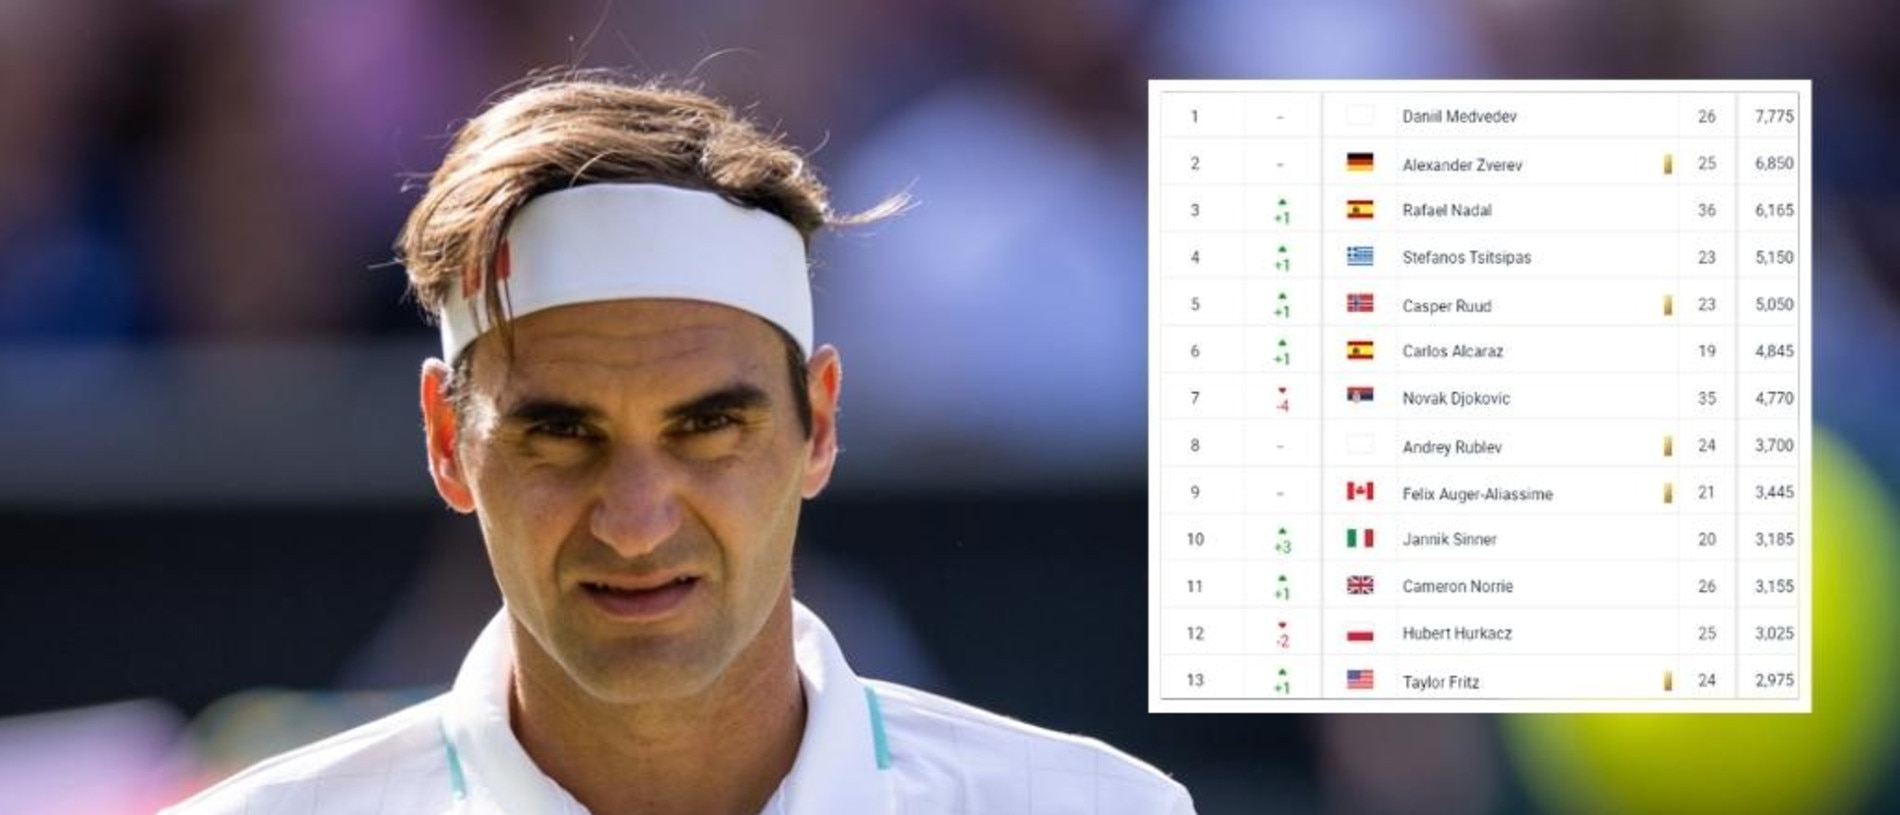 Wimbledon 2022 Roger Federer vanishes from ATP rankings in 25-year first, tennis news